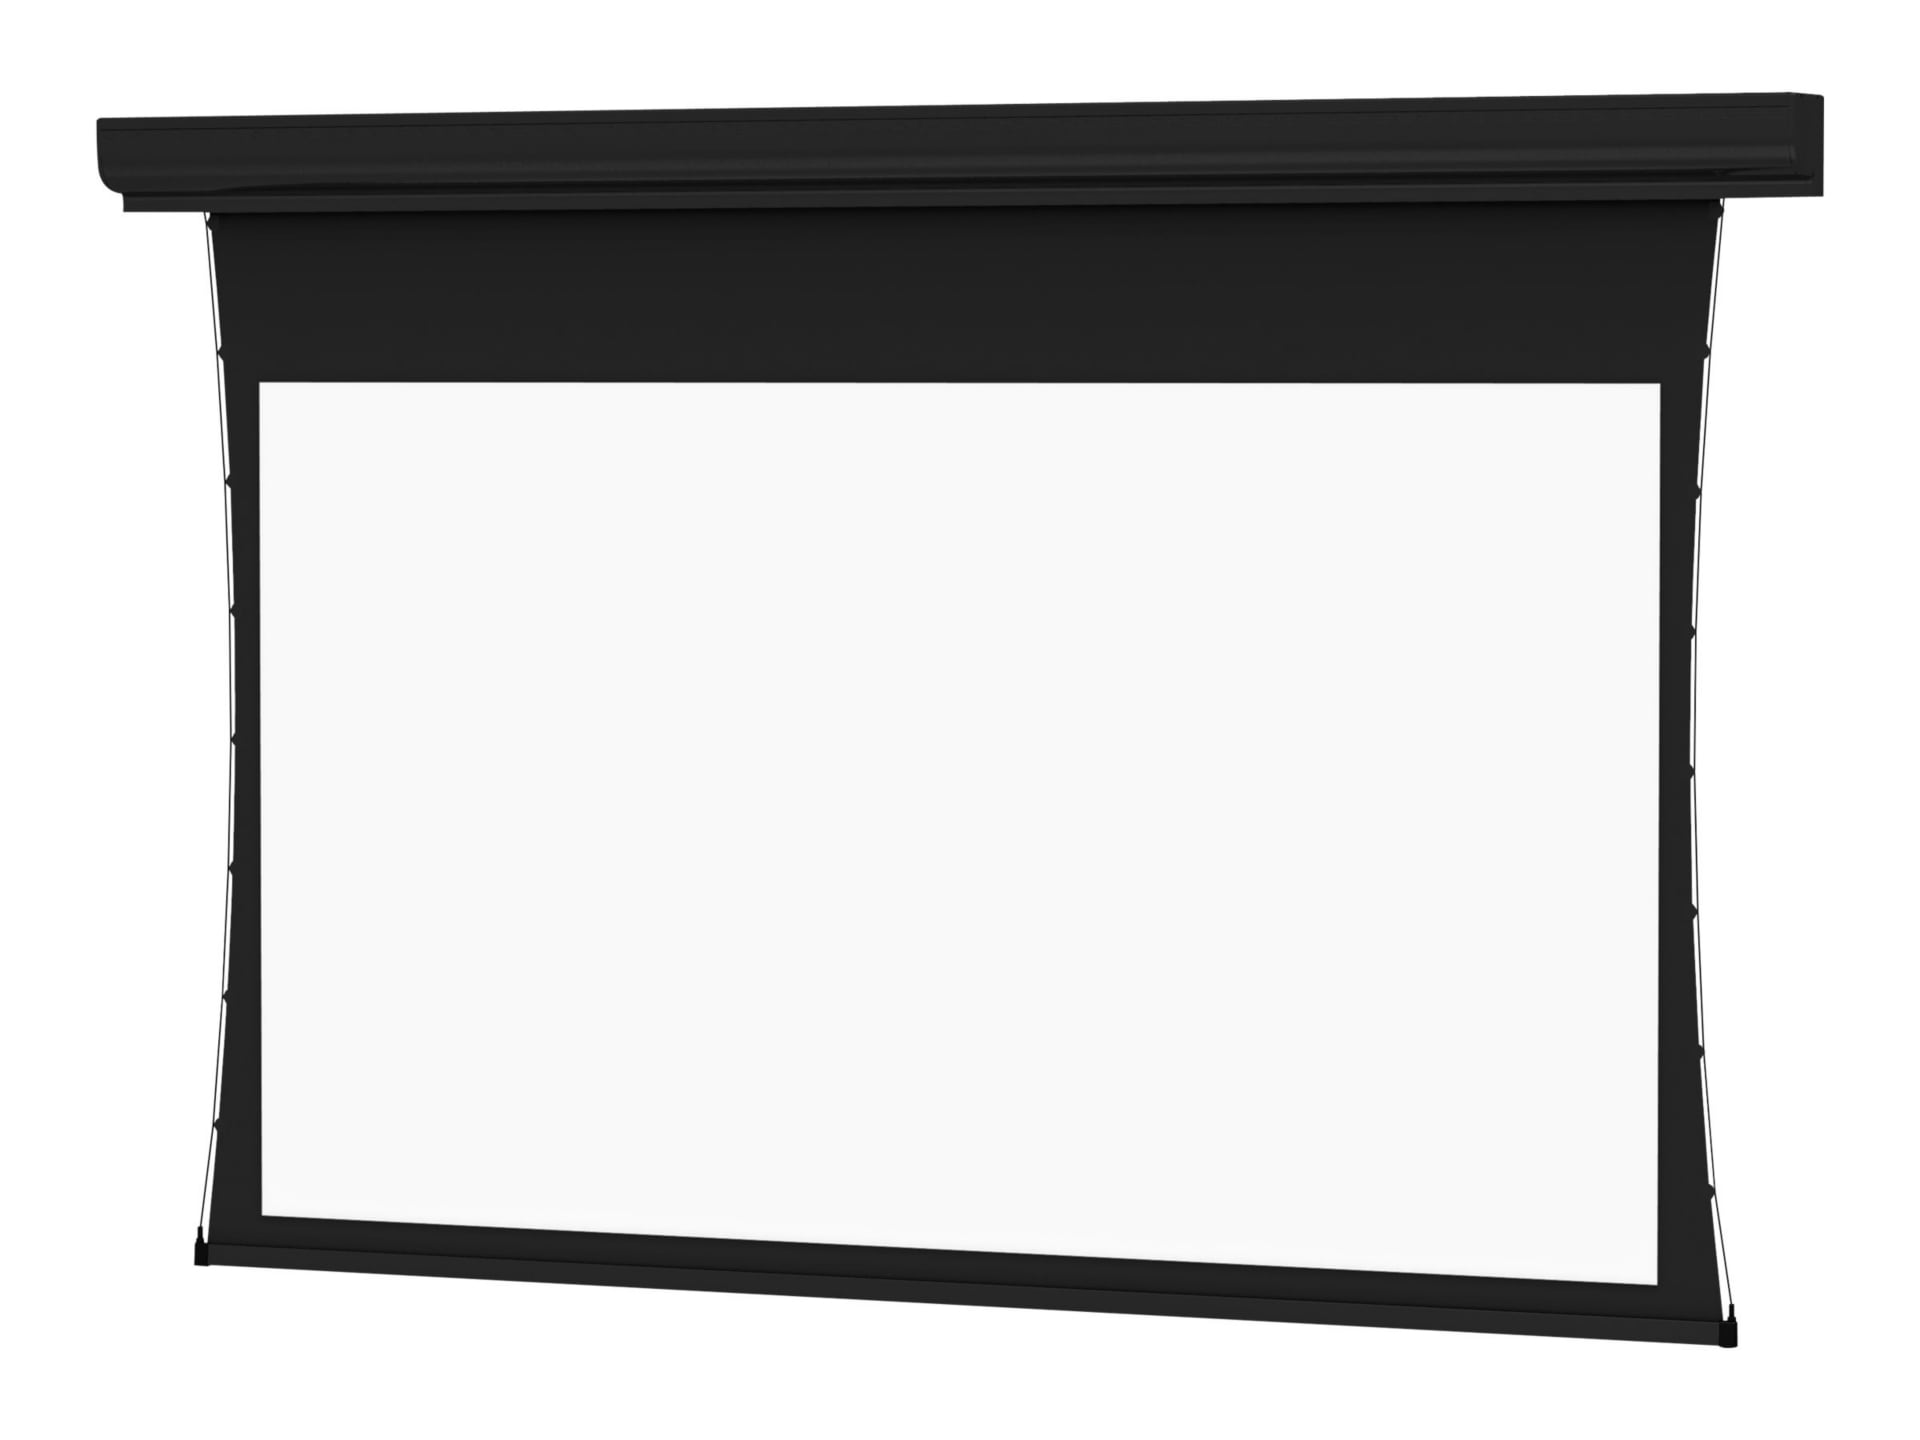 Da-Lite Tensioned Contour Electrol HDTV Format - projection screen - 133" (